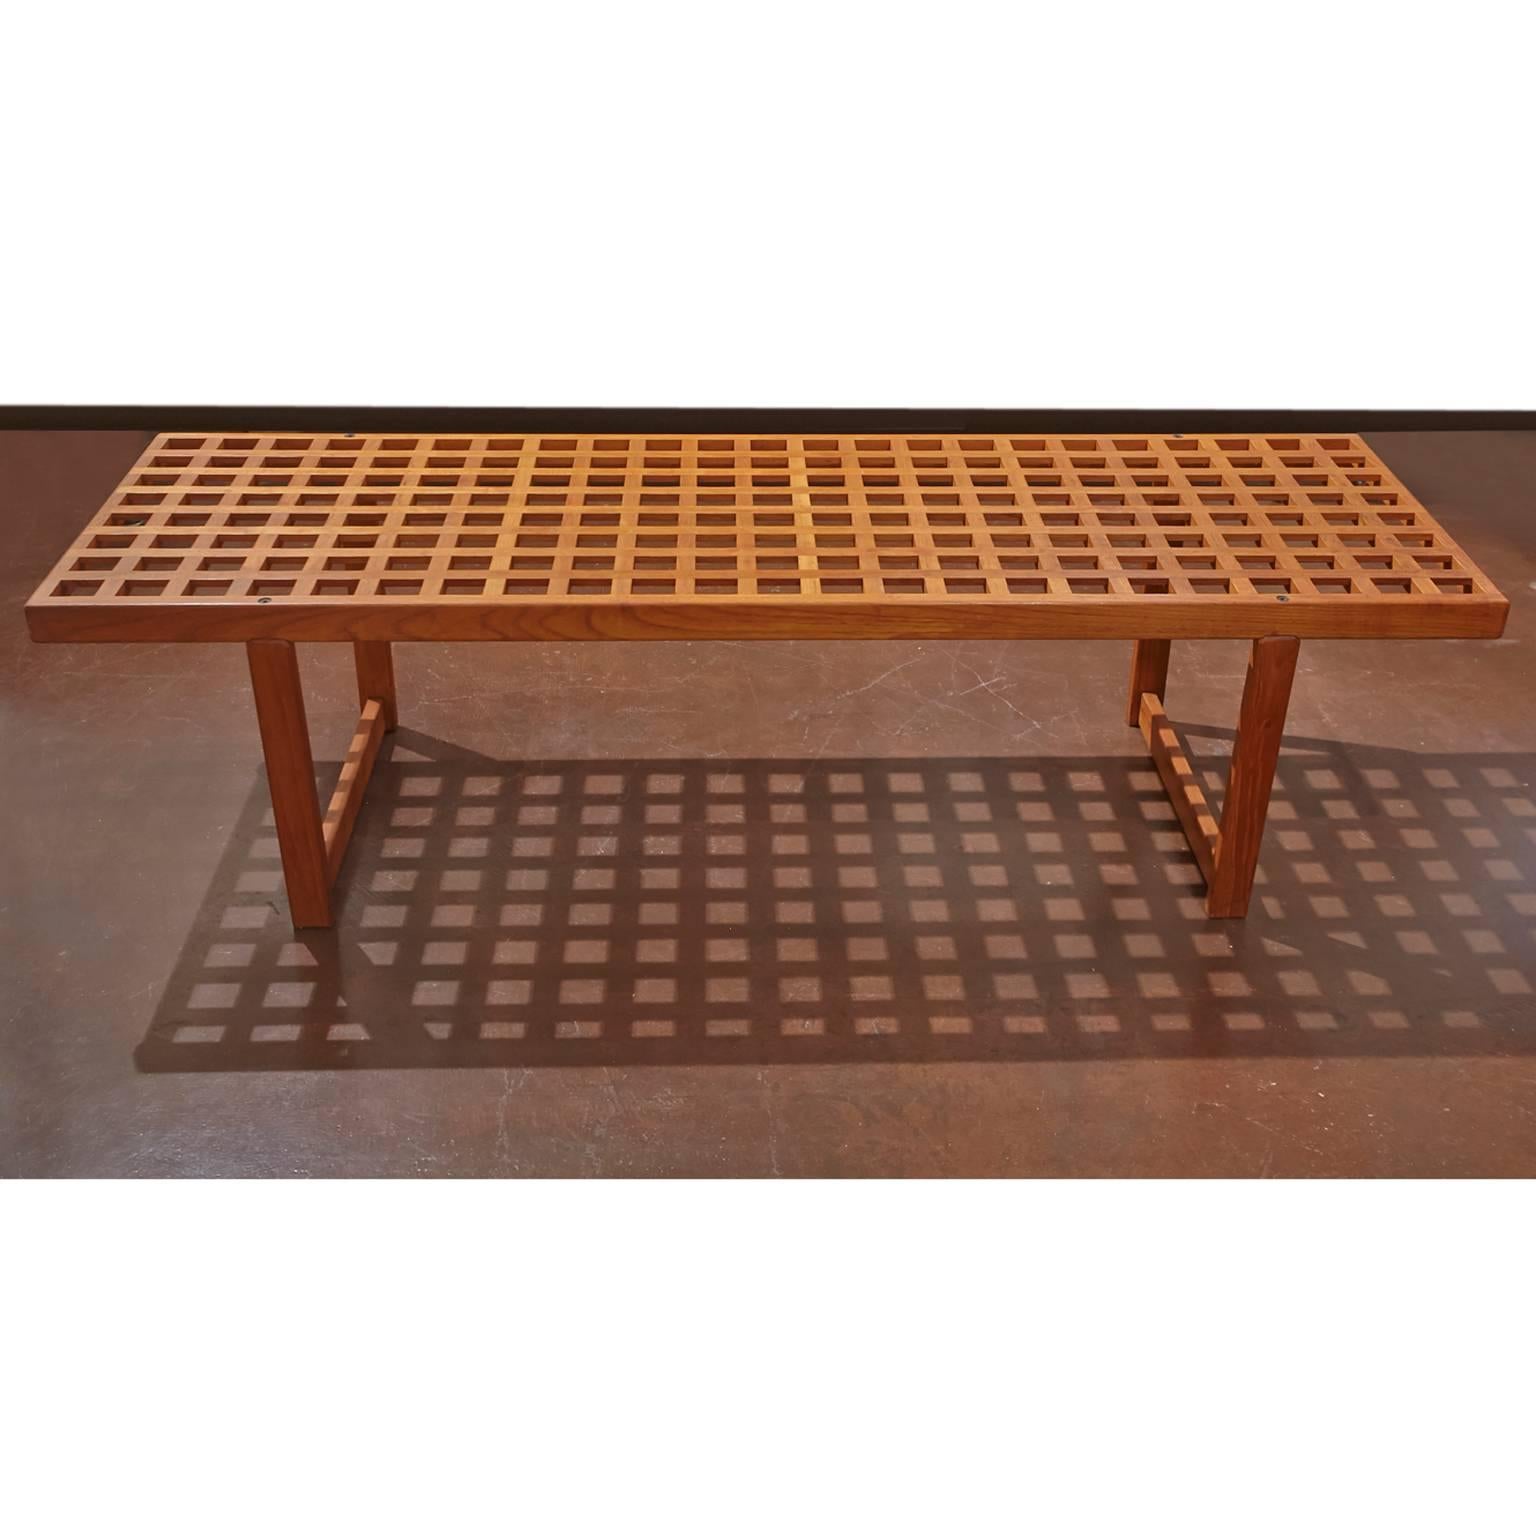 Danish modern Lovig Nielsen slat bench could be used as a coffee table. Has Lovig sticker on end bench.